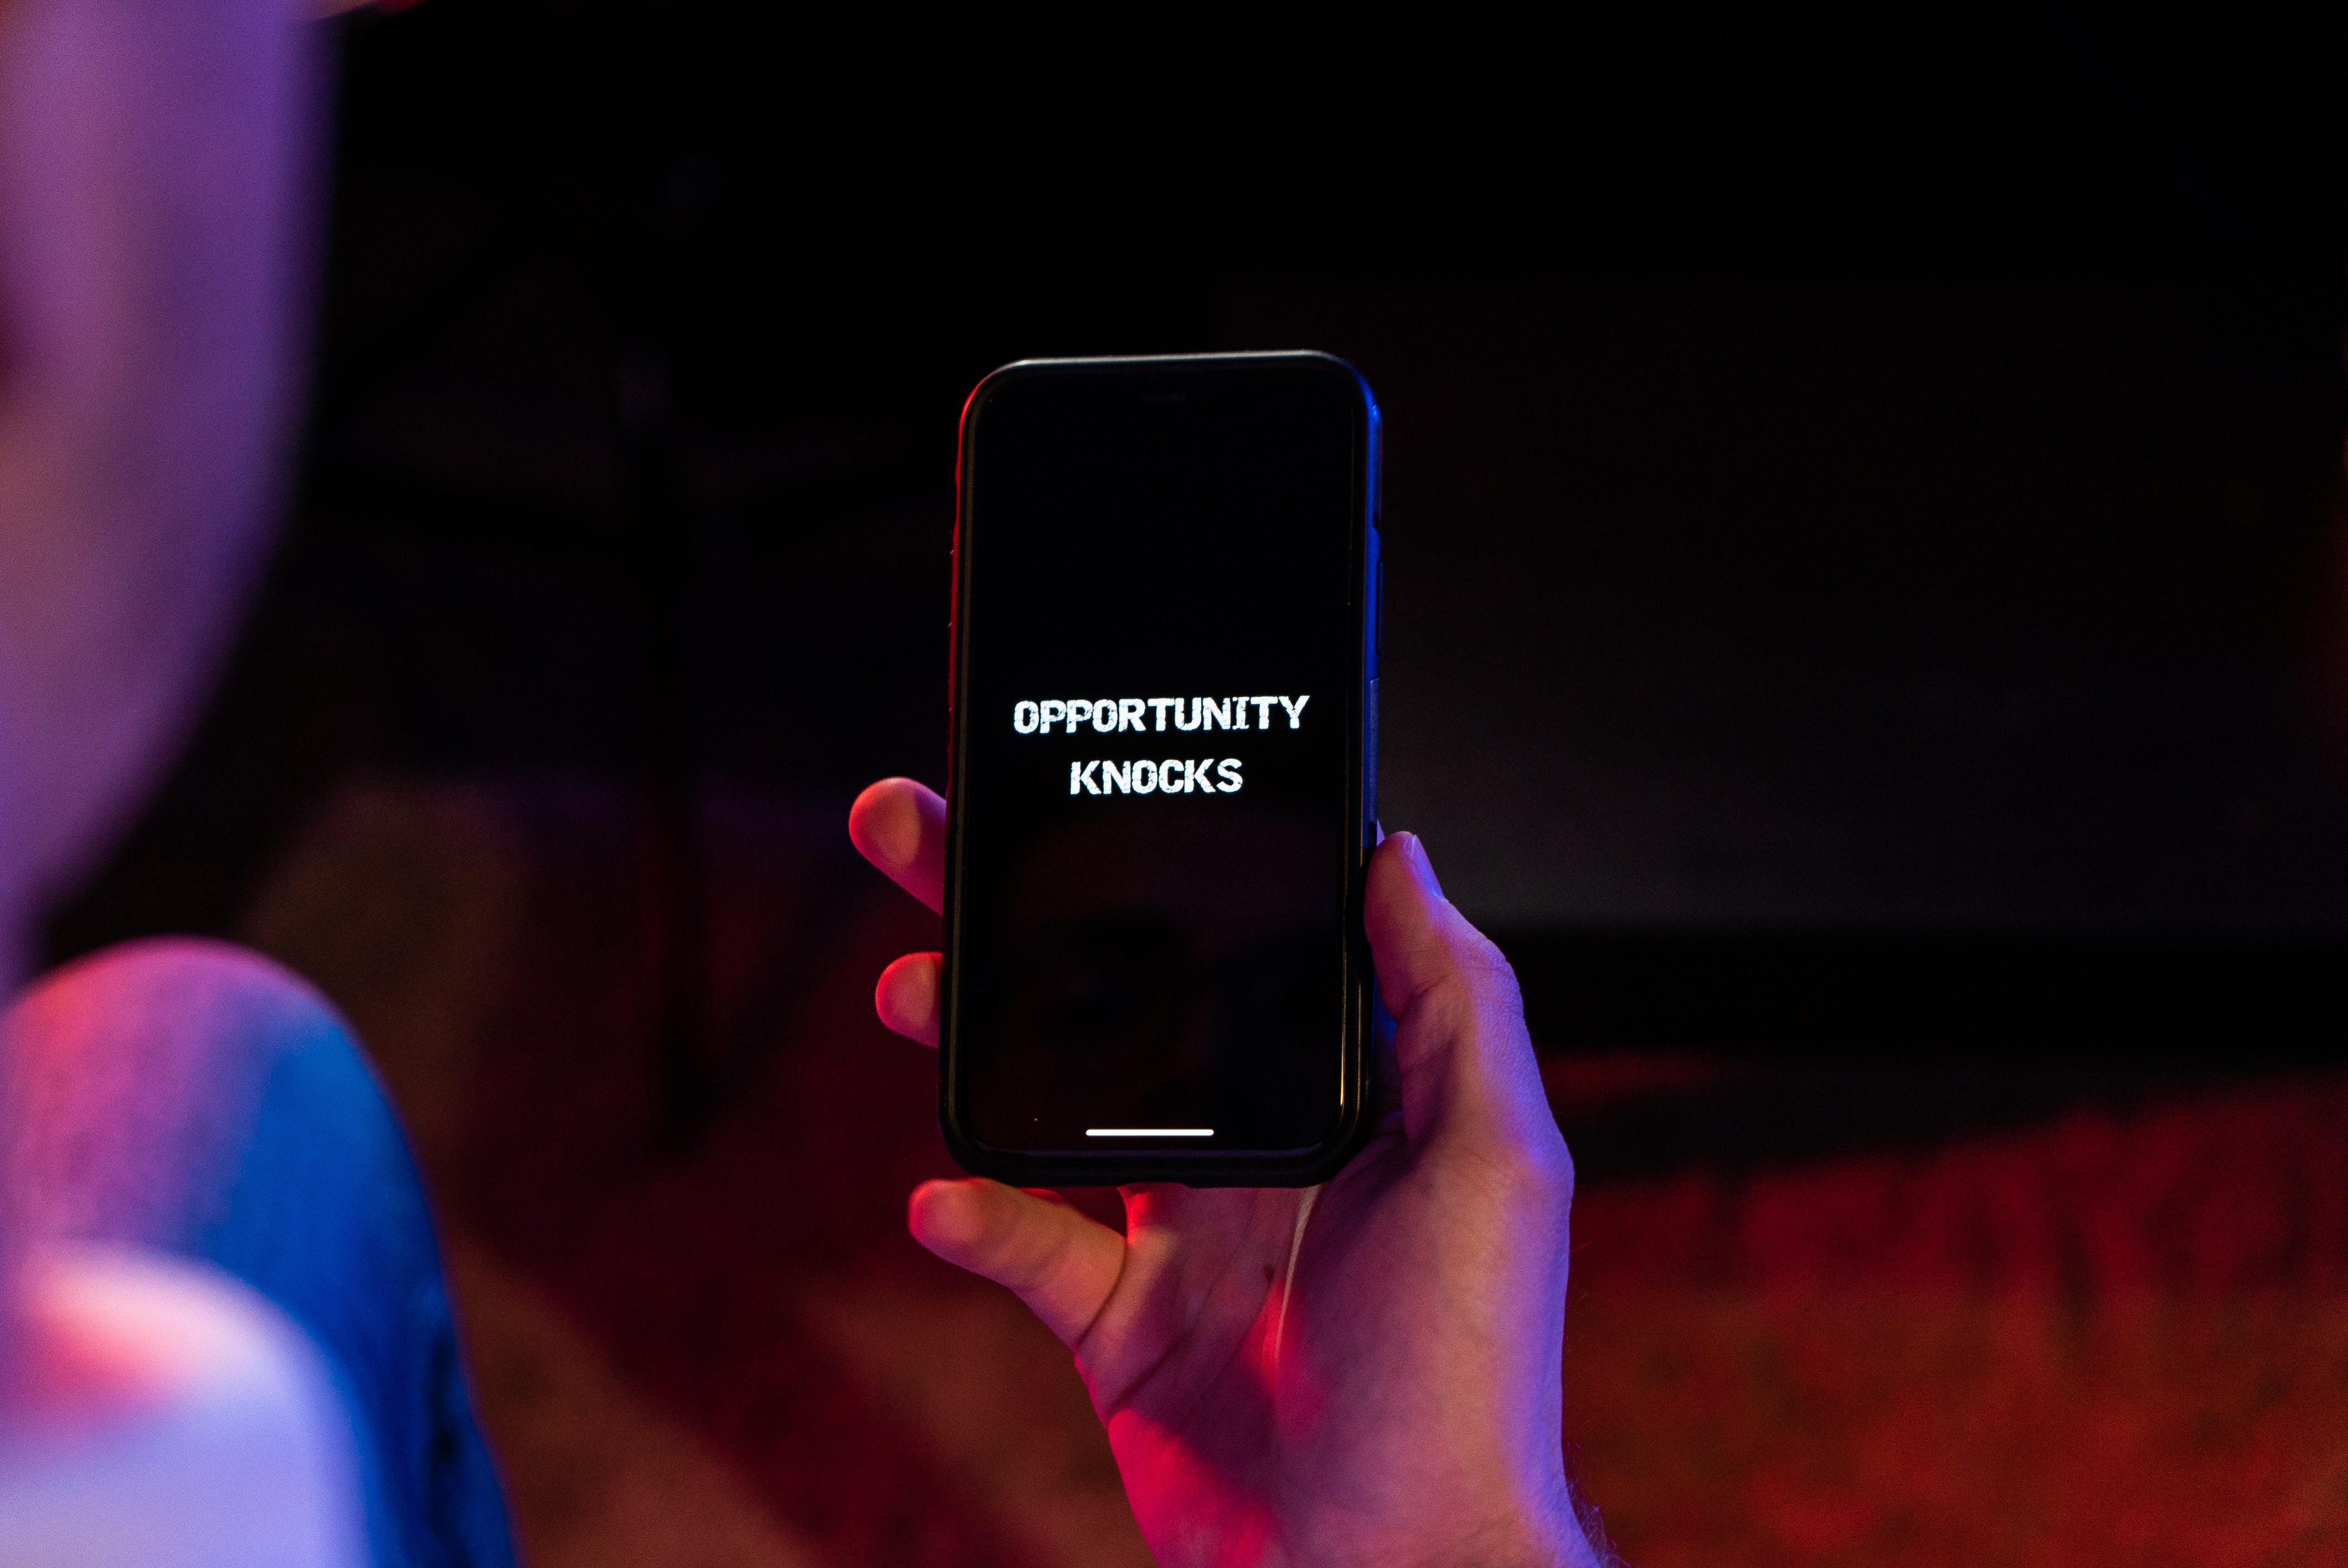 Opportunity knocks is written on a cellphone someone is holding